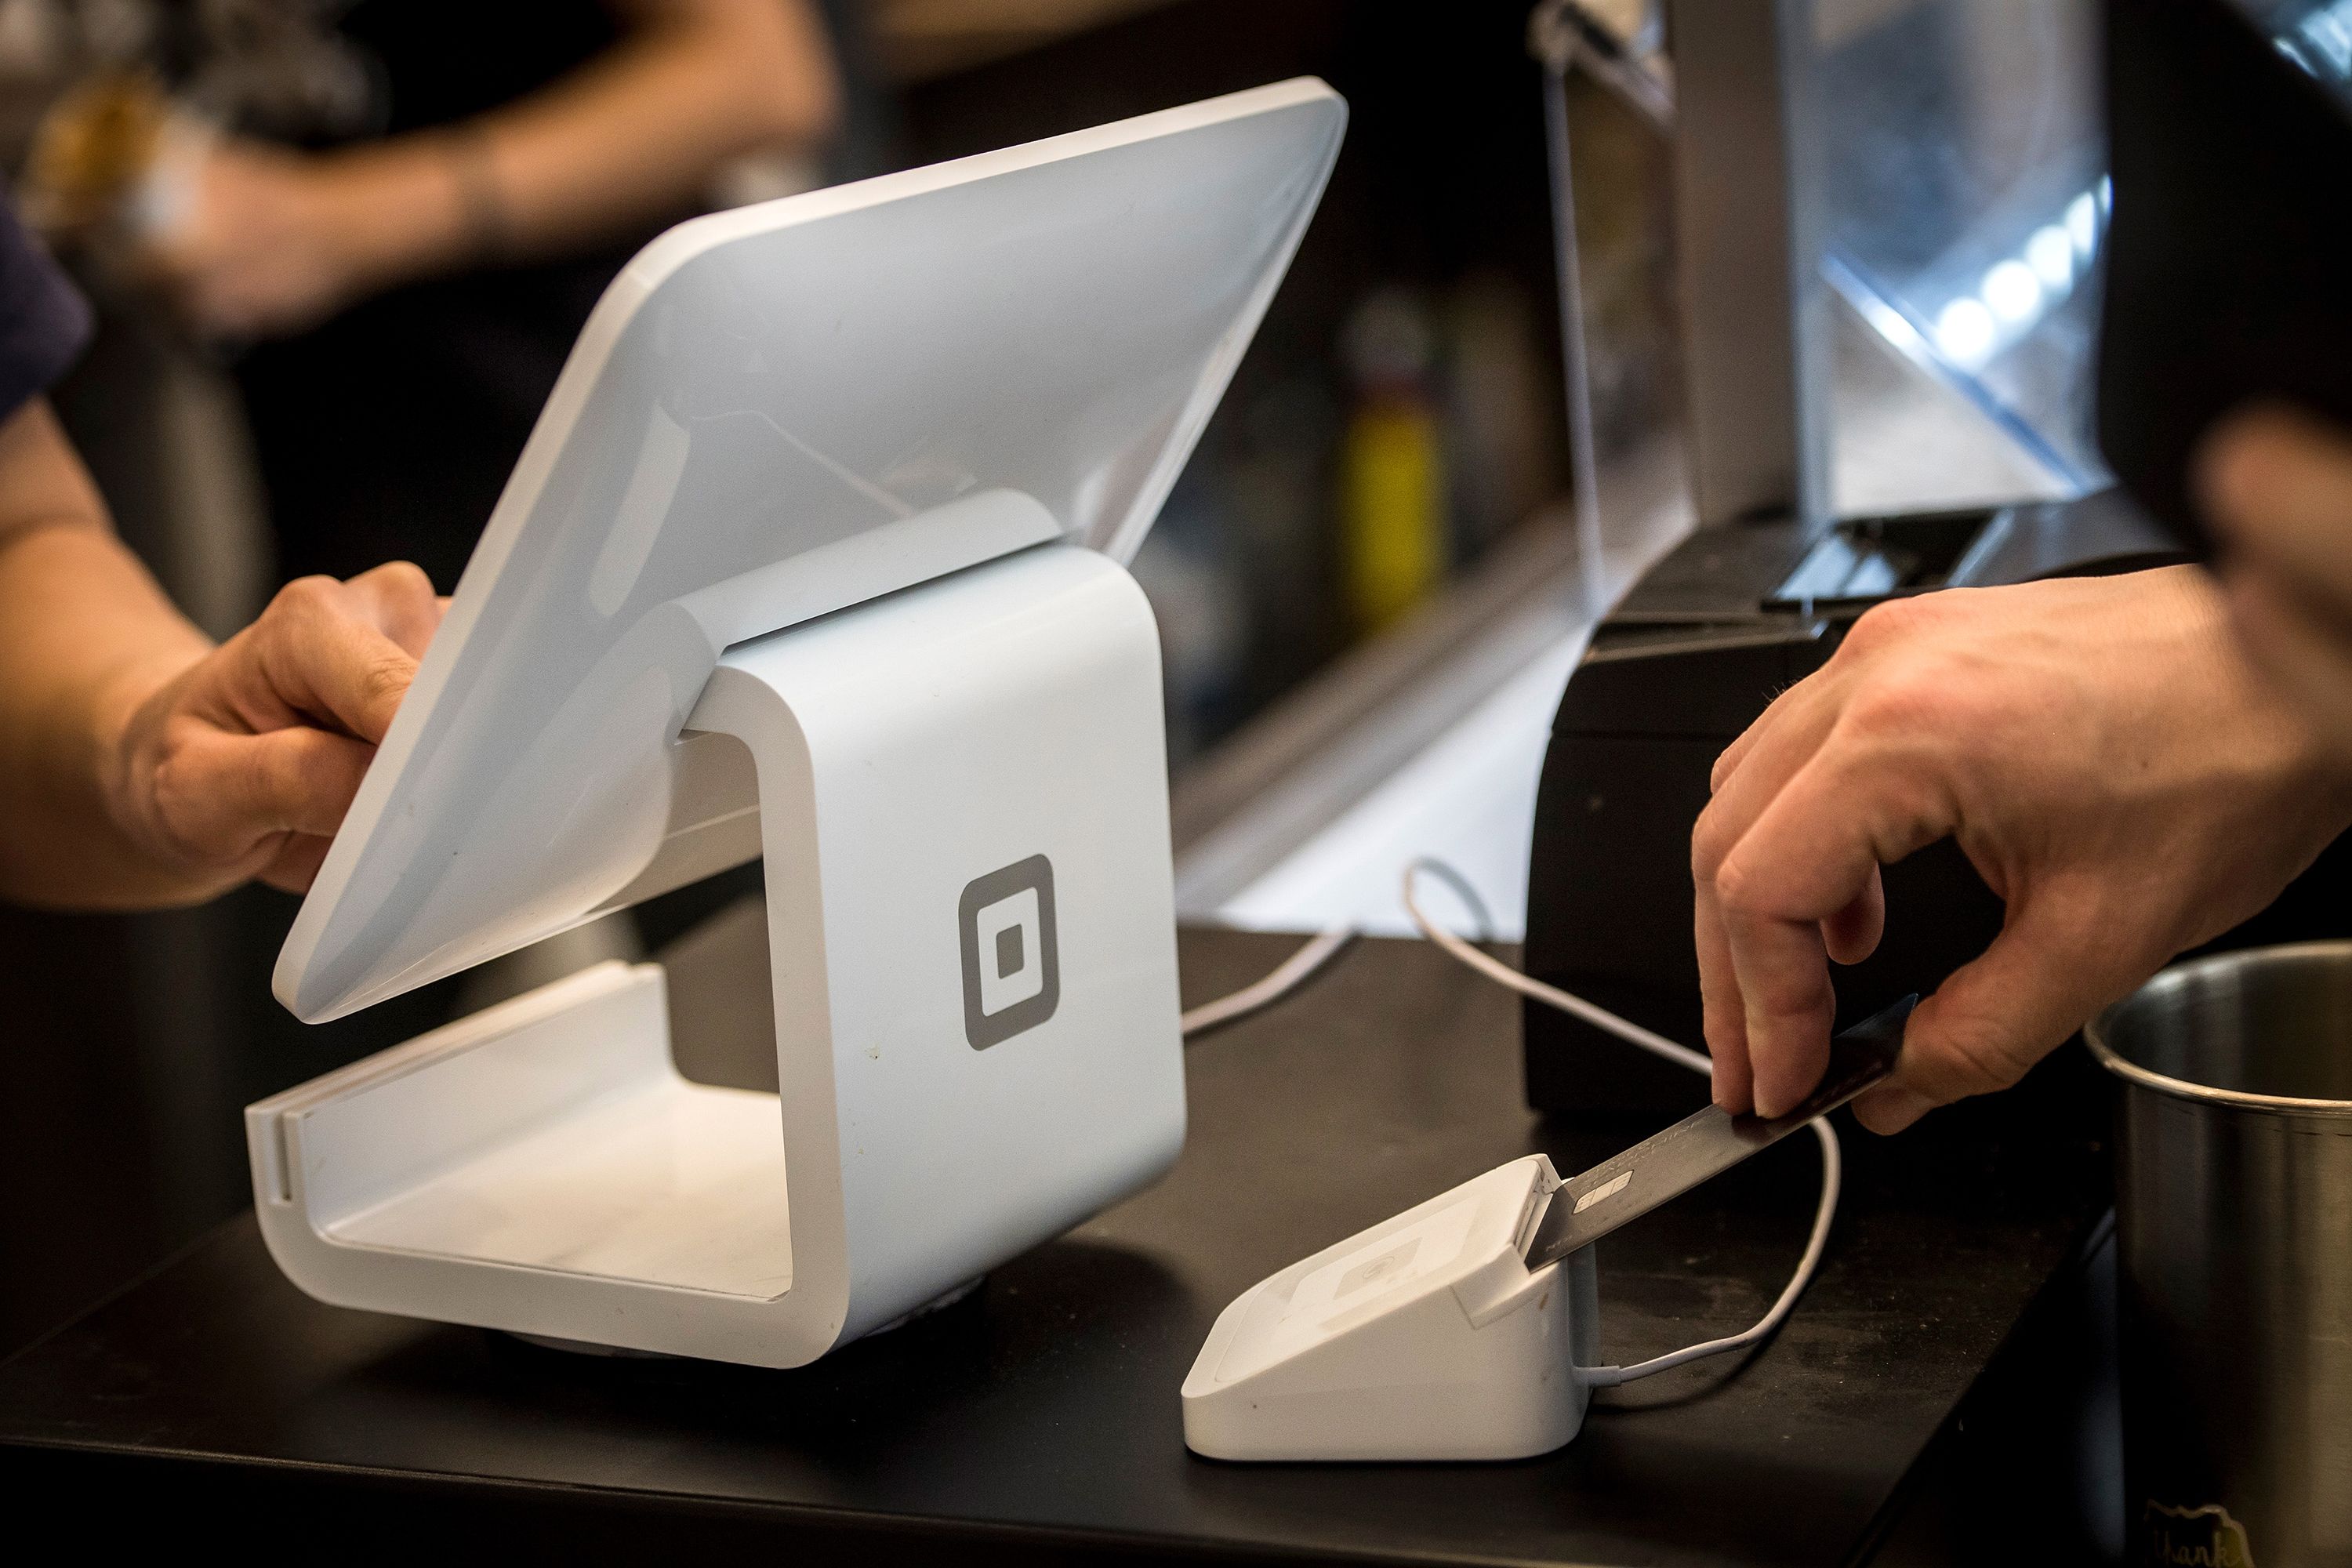 Square to buy Australia's Afterpay for $39 billion